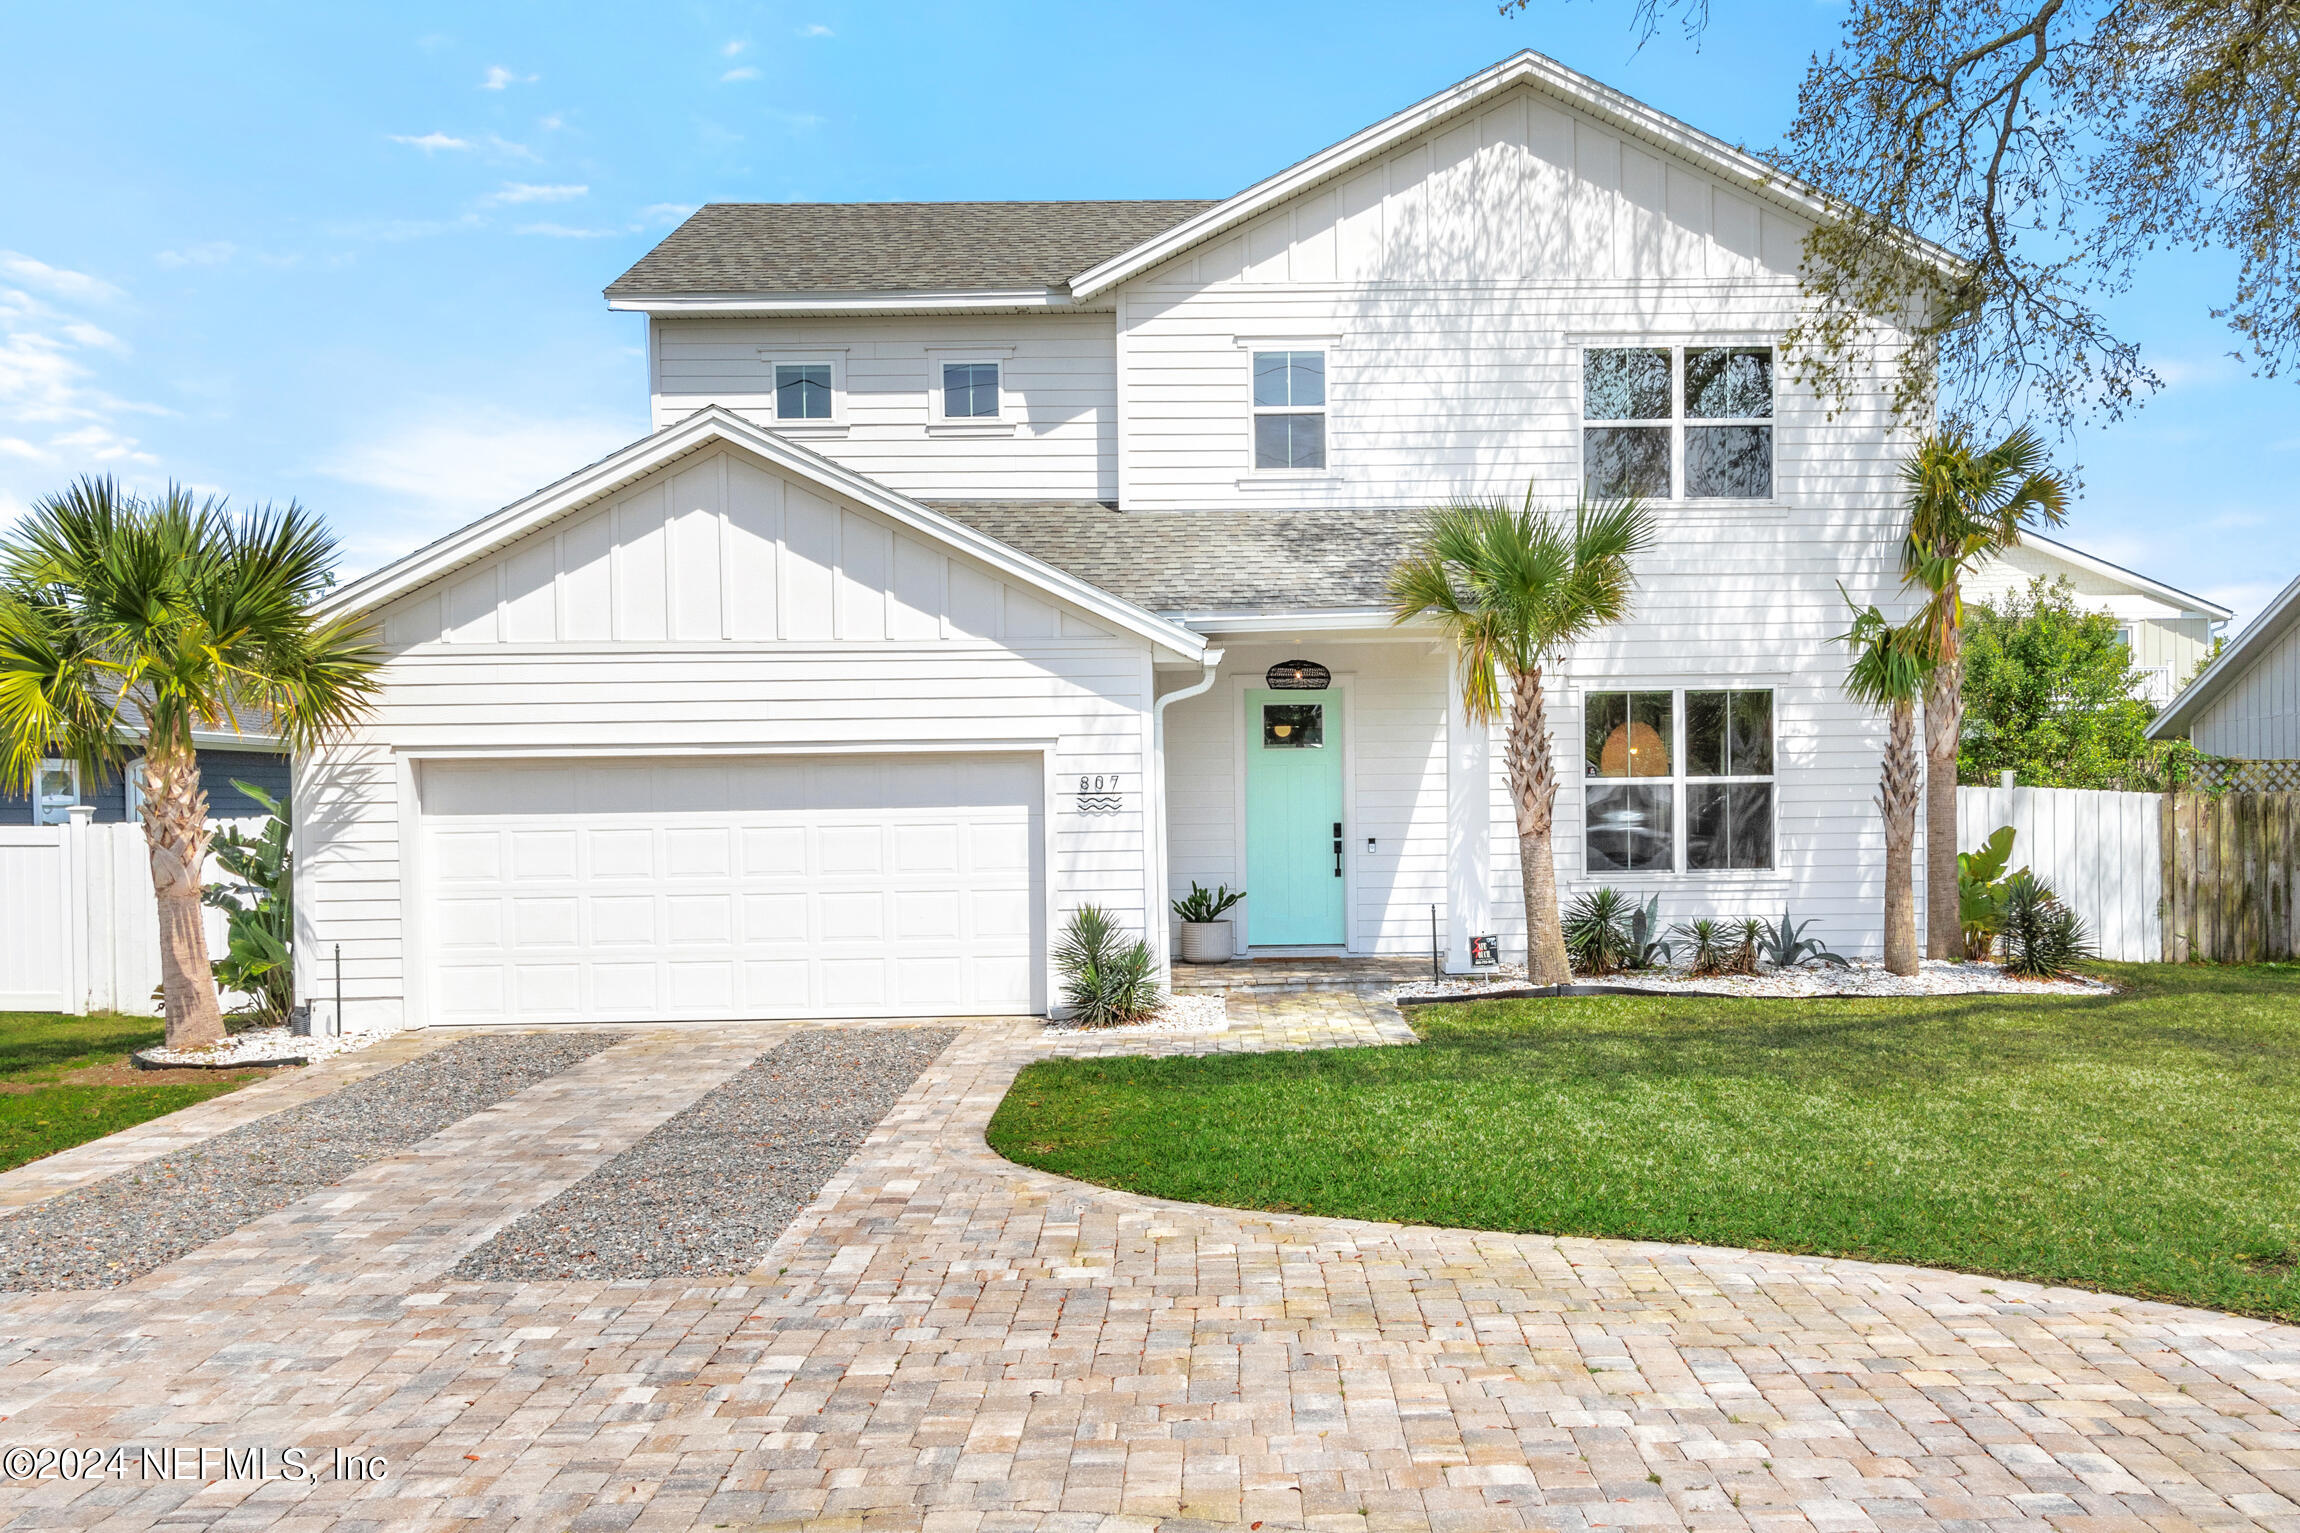 Jacksonville Beach, FL home for sale located at 807 Penman Road, Jacksonville Beach, FL 32250